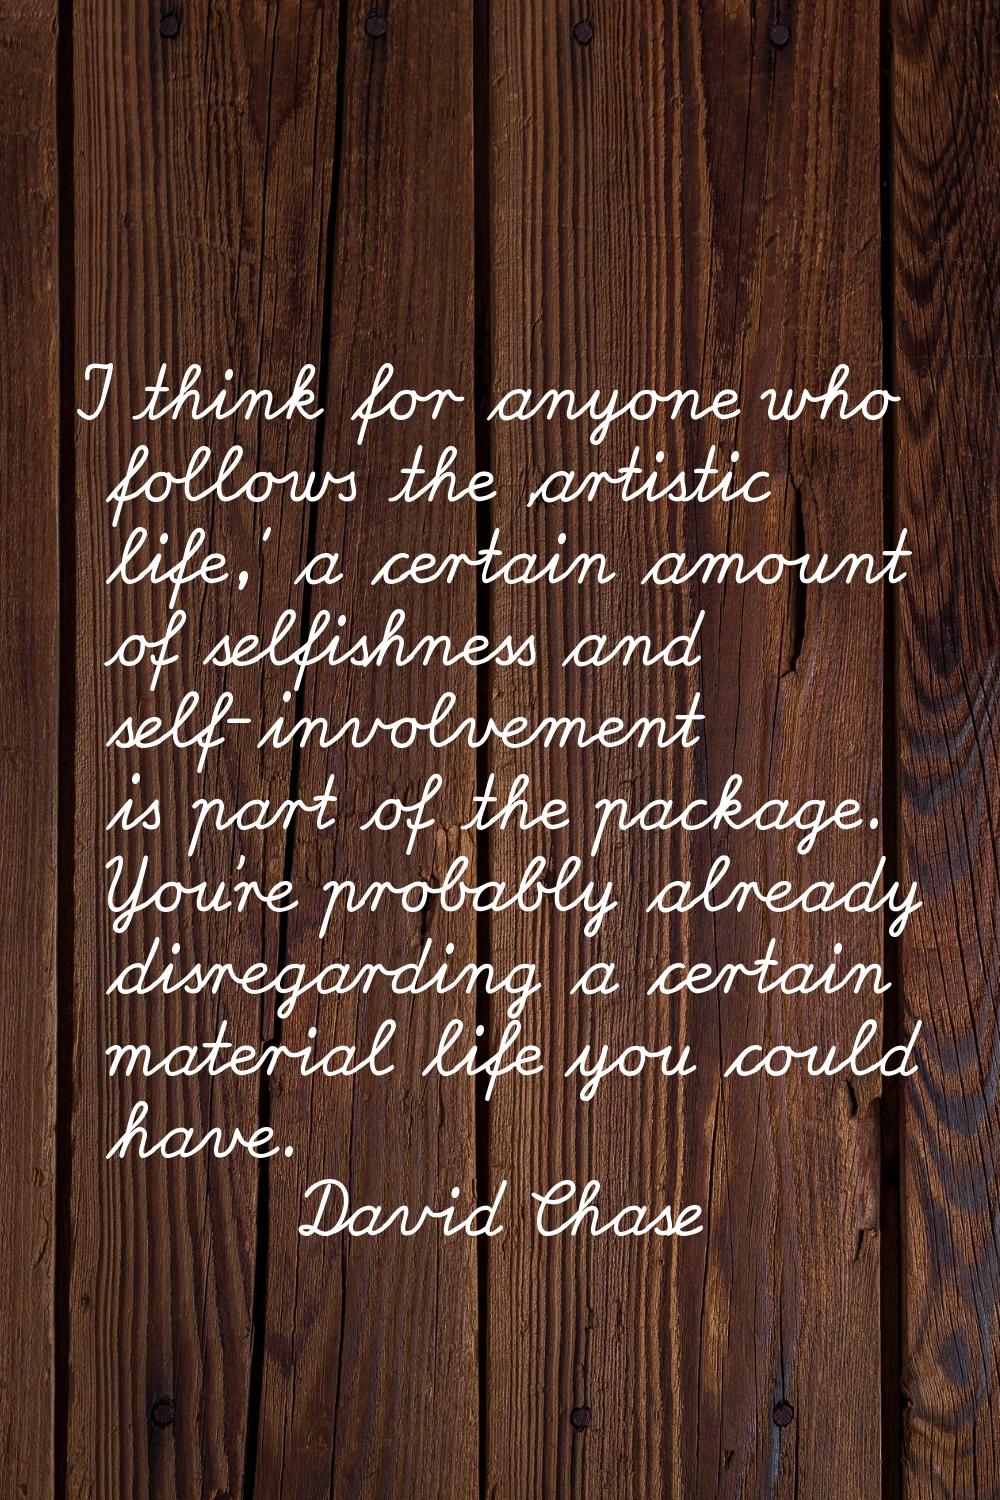 I think for anyone who follows the 'artistic life,' a certain amount of selfishness and self-involv